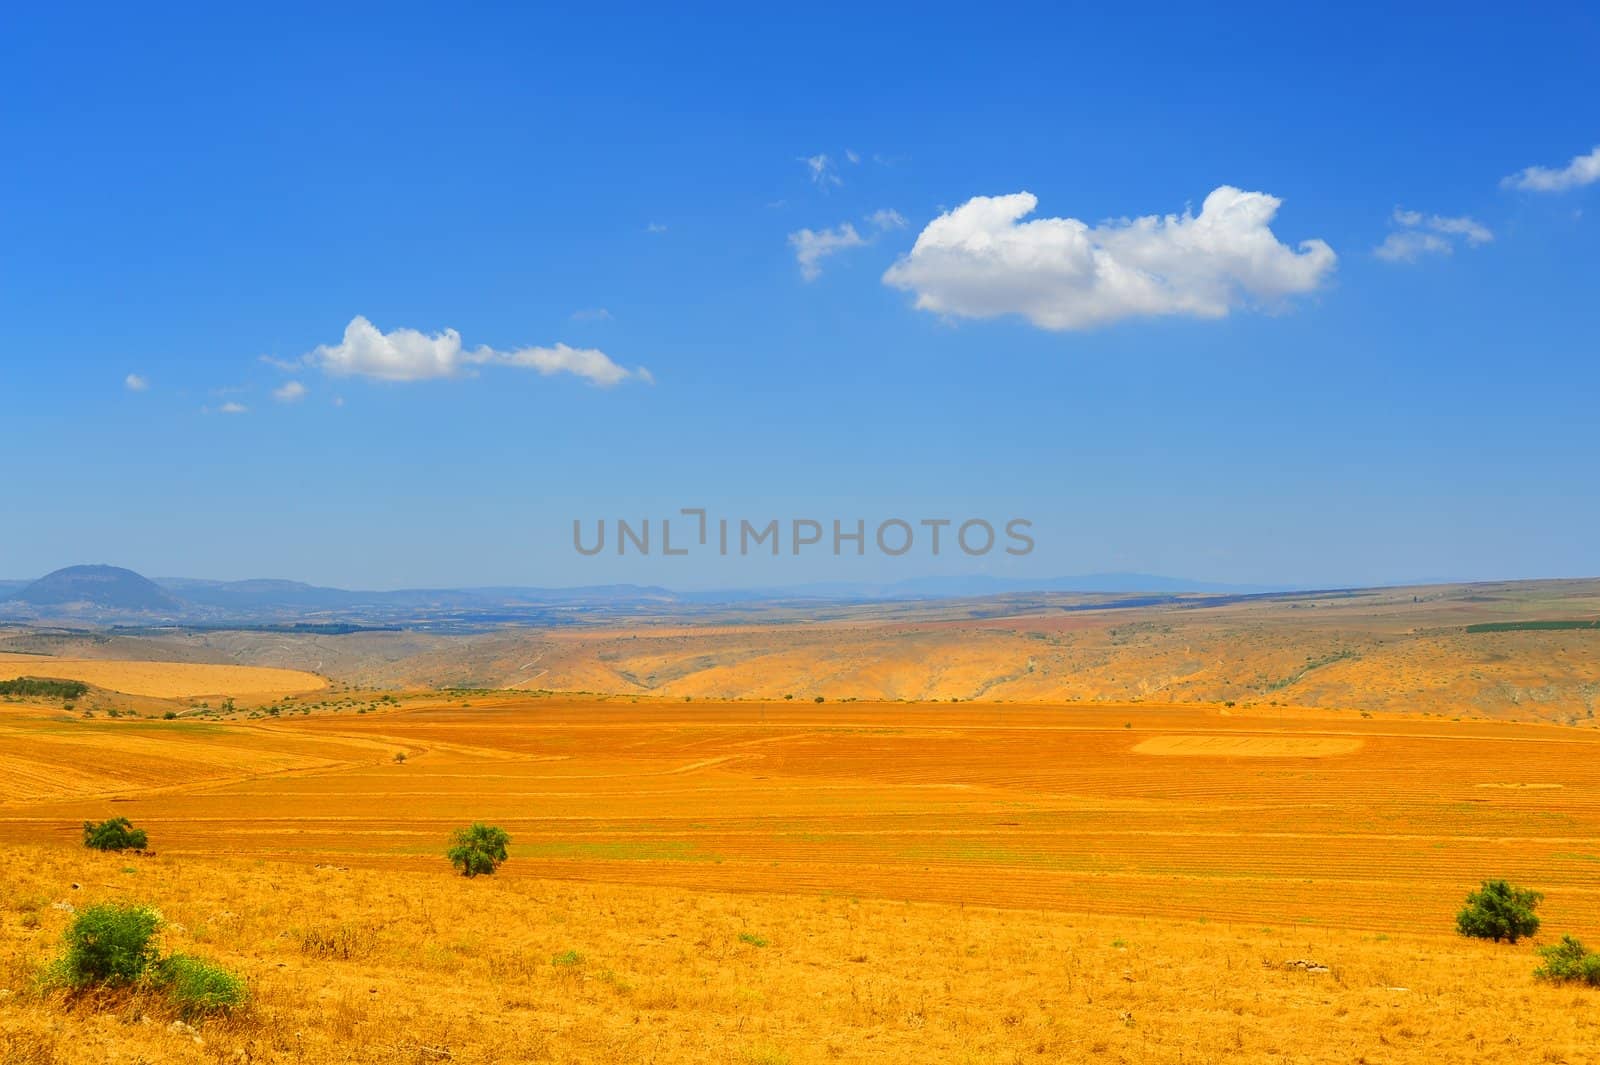 Autumn Yellow Field After Harvest In Upper Galilee, Israel.